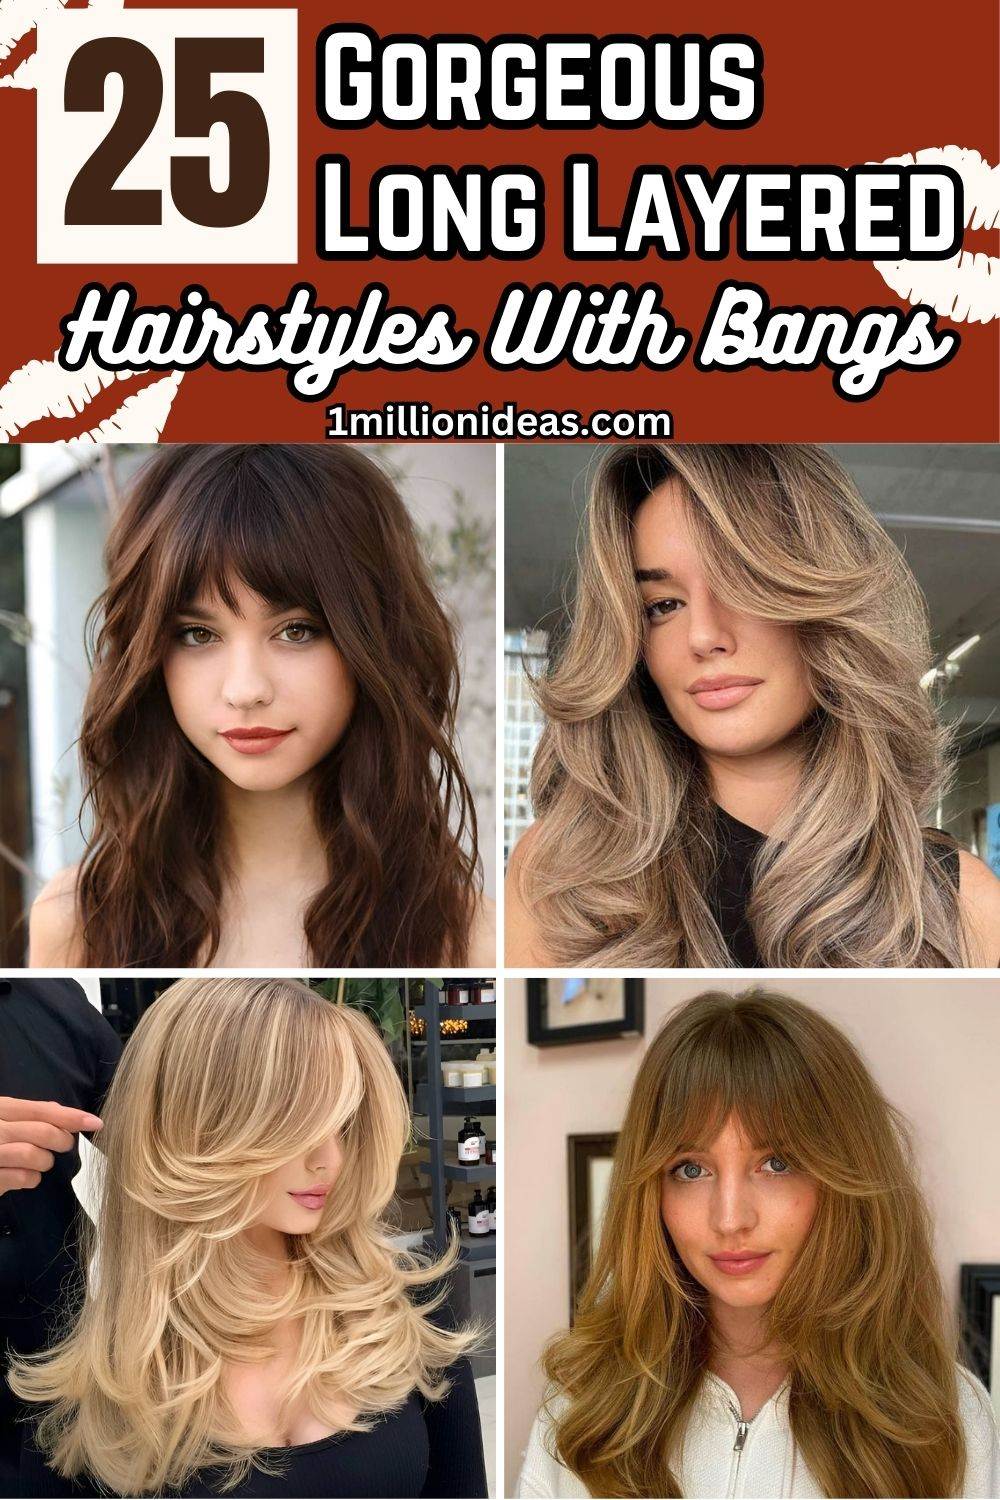 25 Gorgeous Long-Layered Hairstyles With Bangs